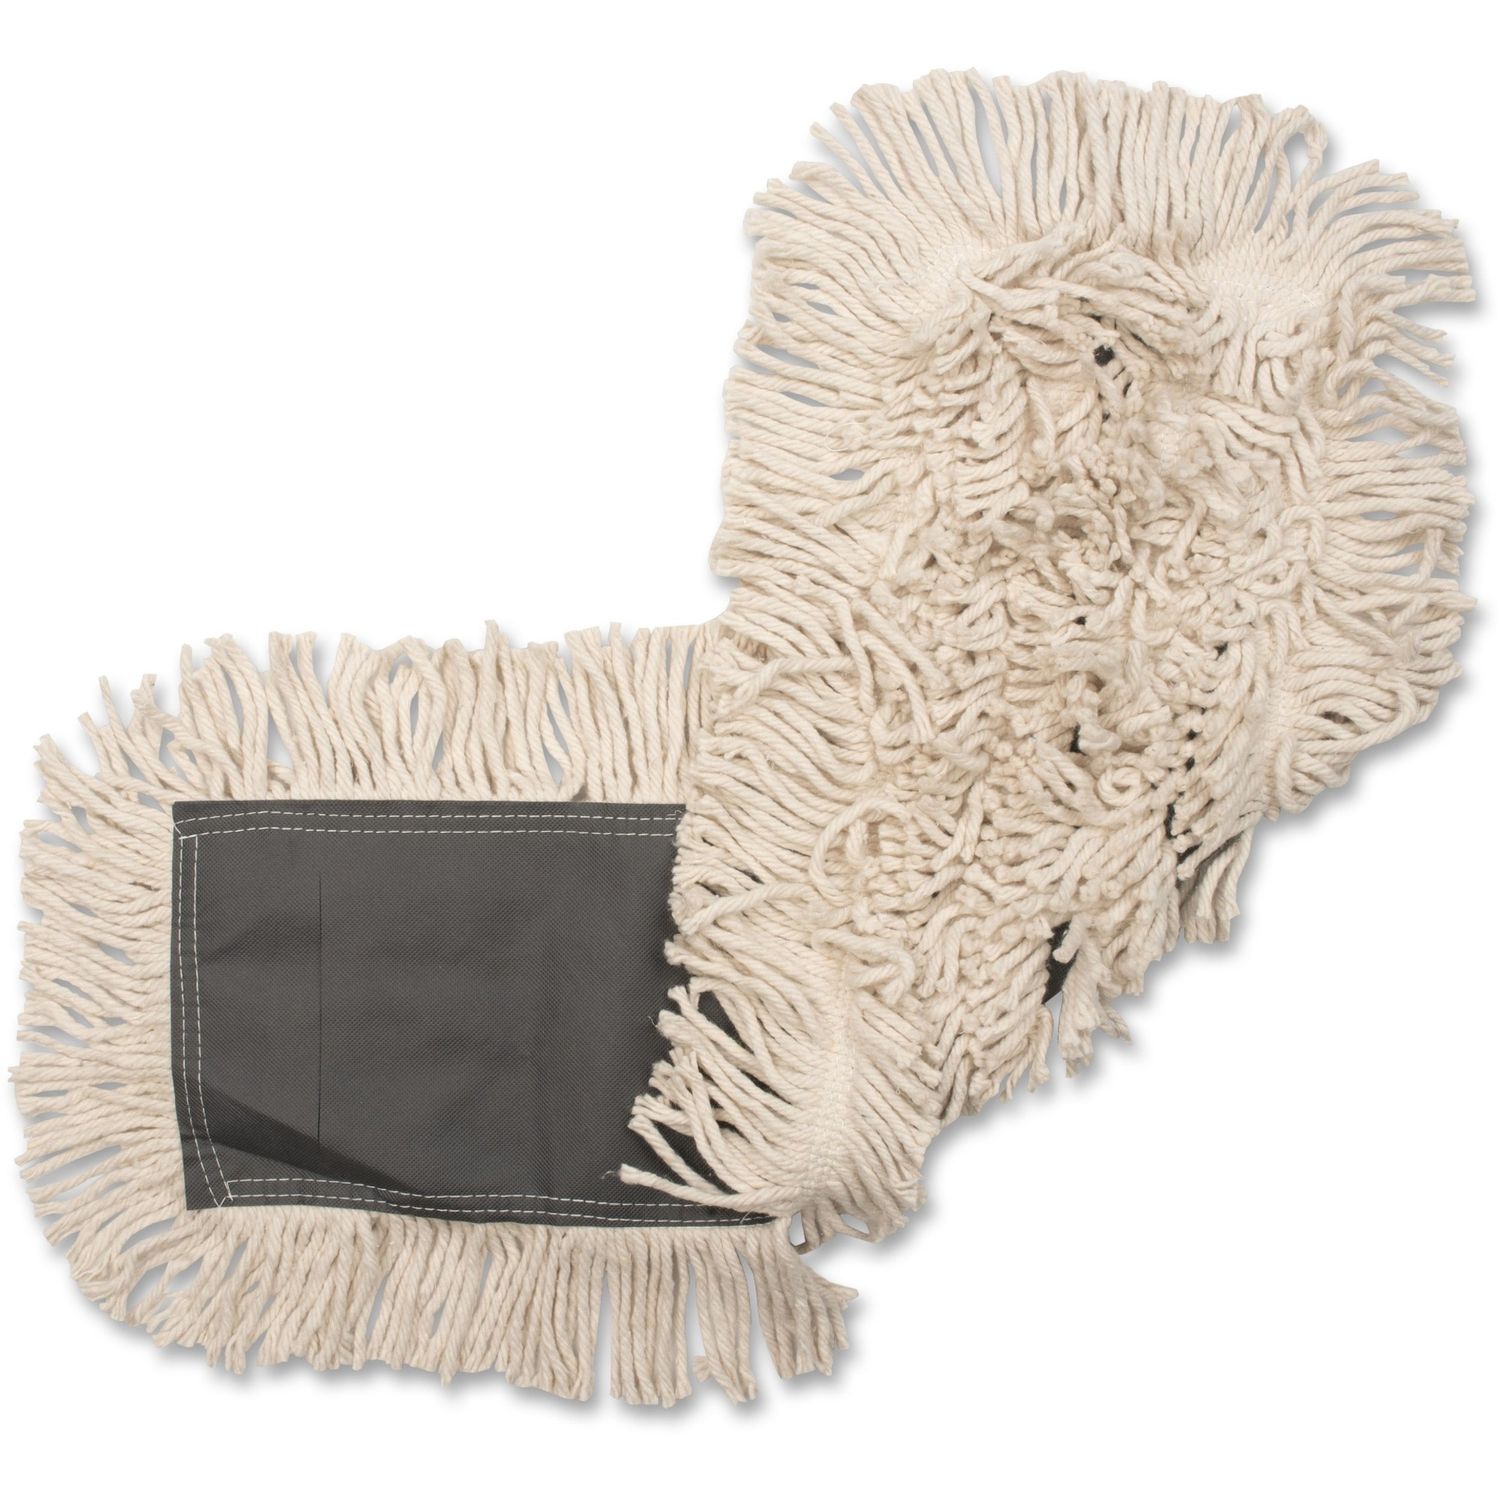 Disposable Dust Mop Refill 5" Width x 36" Length, Cotton, Synthetic